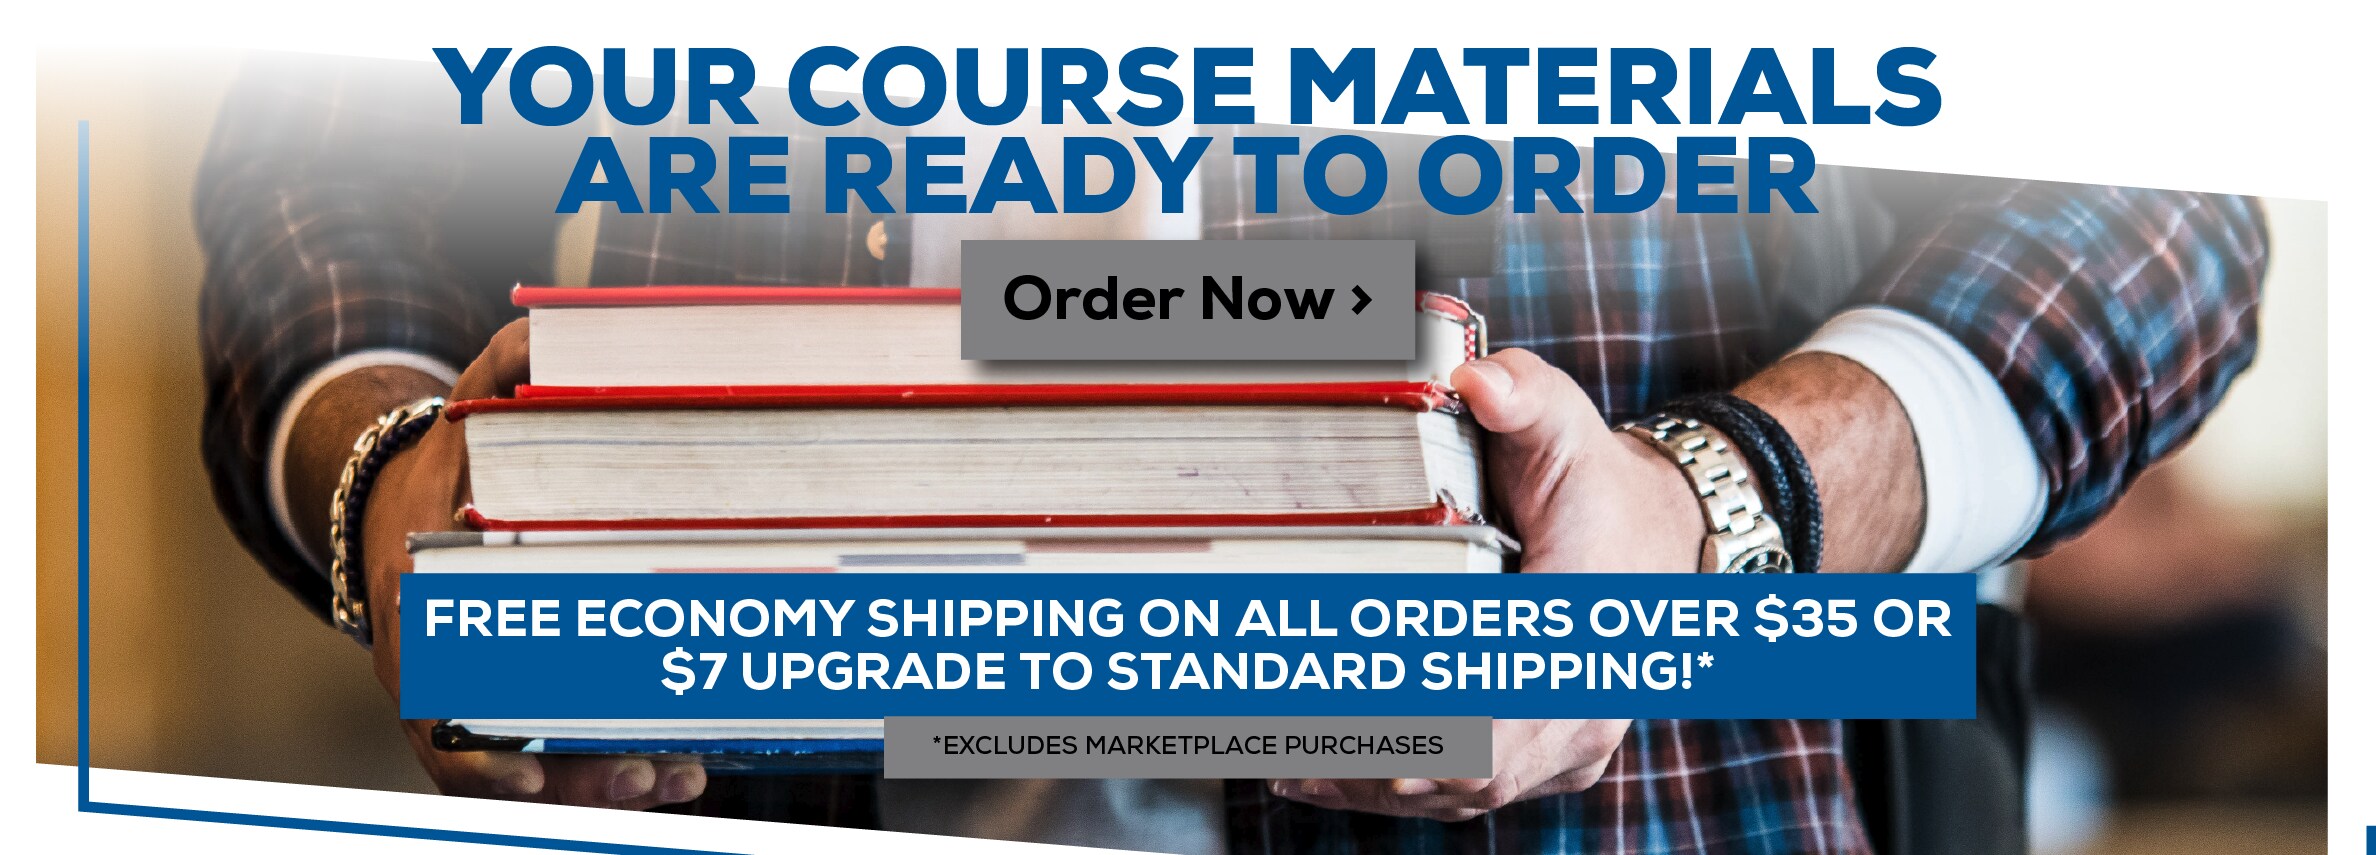 Your Course Materials are Ready to Order. Order Now. Free economy shipping on orders over $35 or $7 upgrade to standard shipping! *Excludes marketplace purchases.